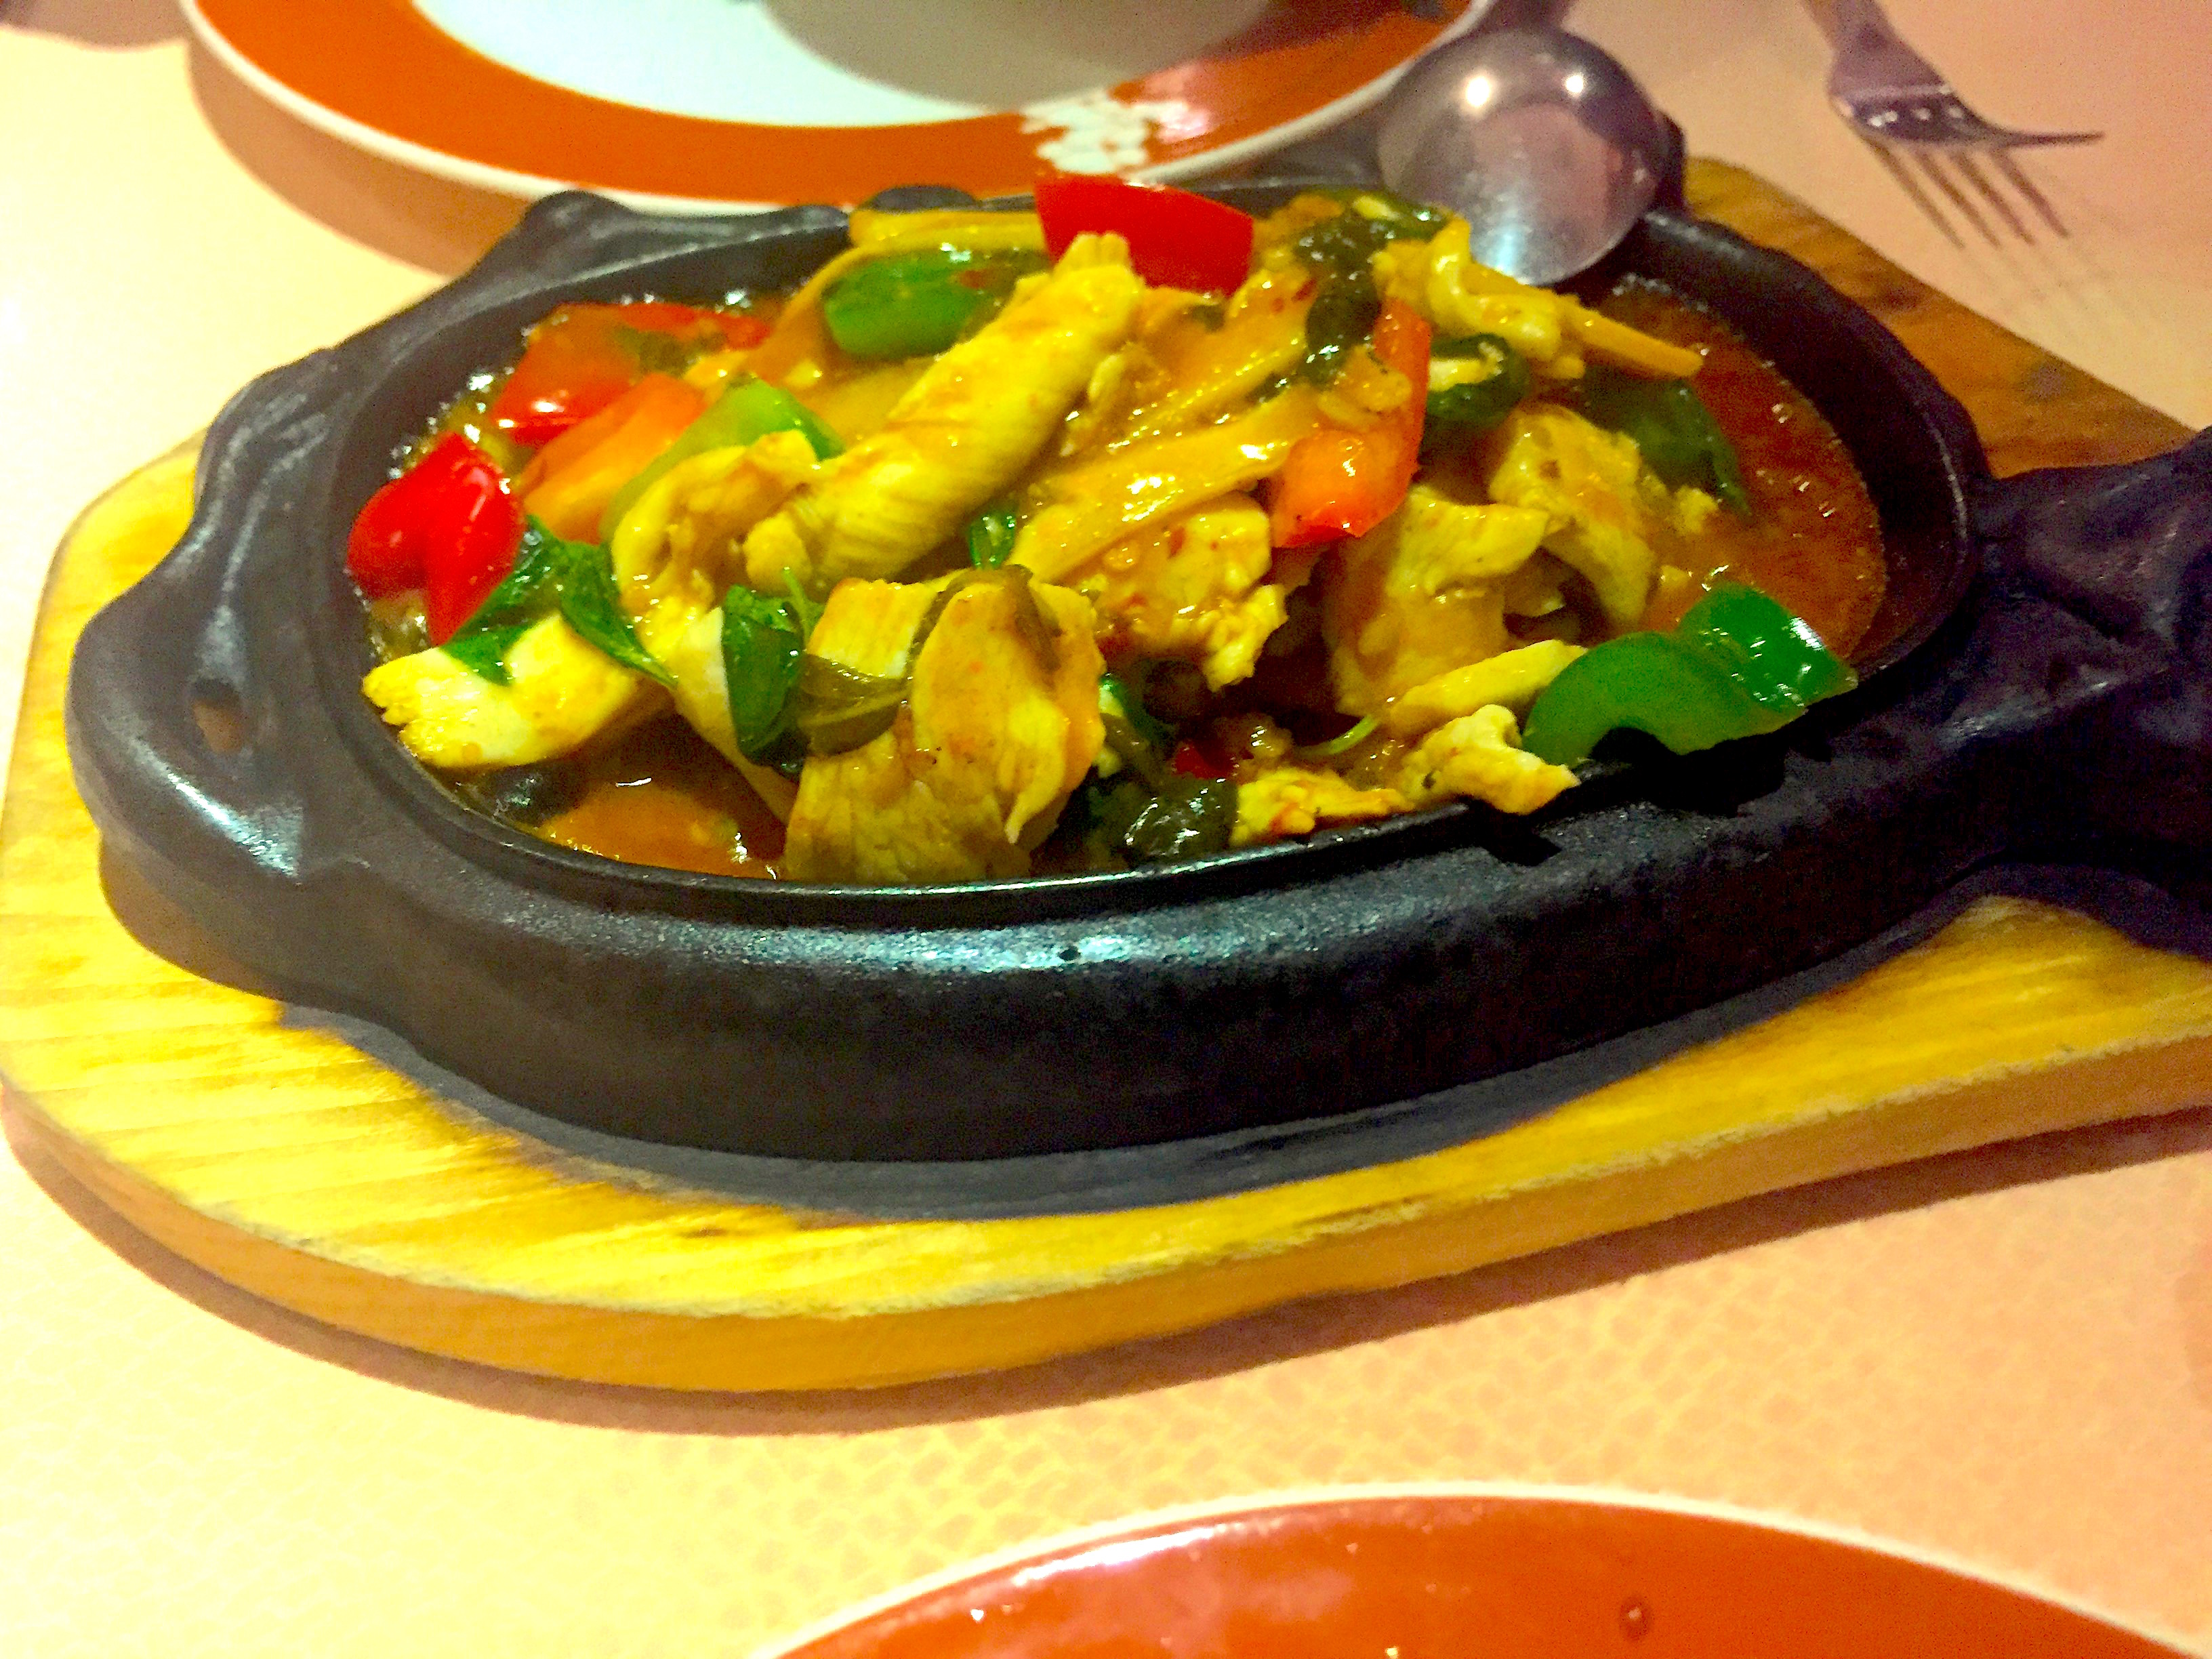 A sizzling plate